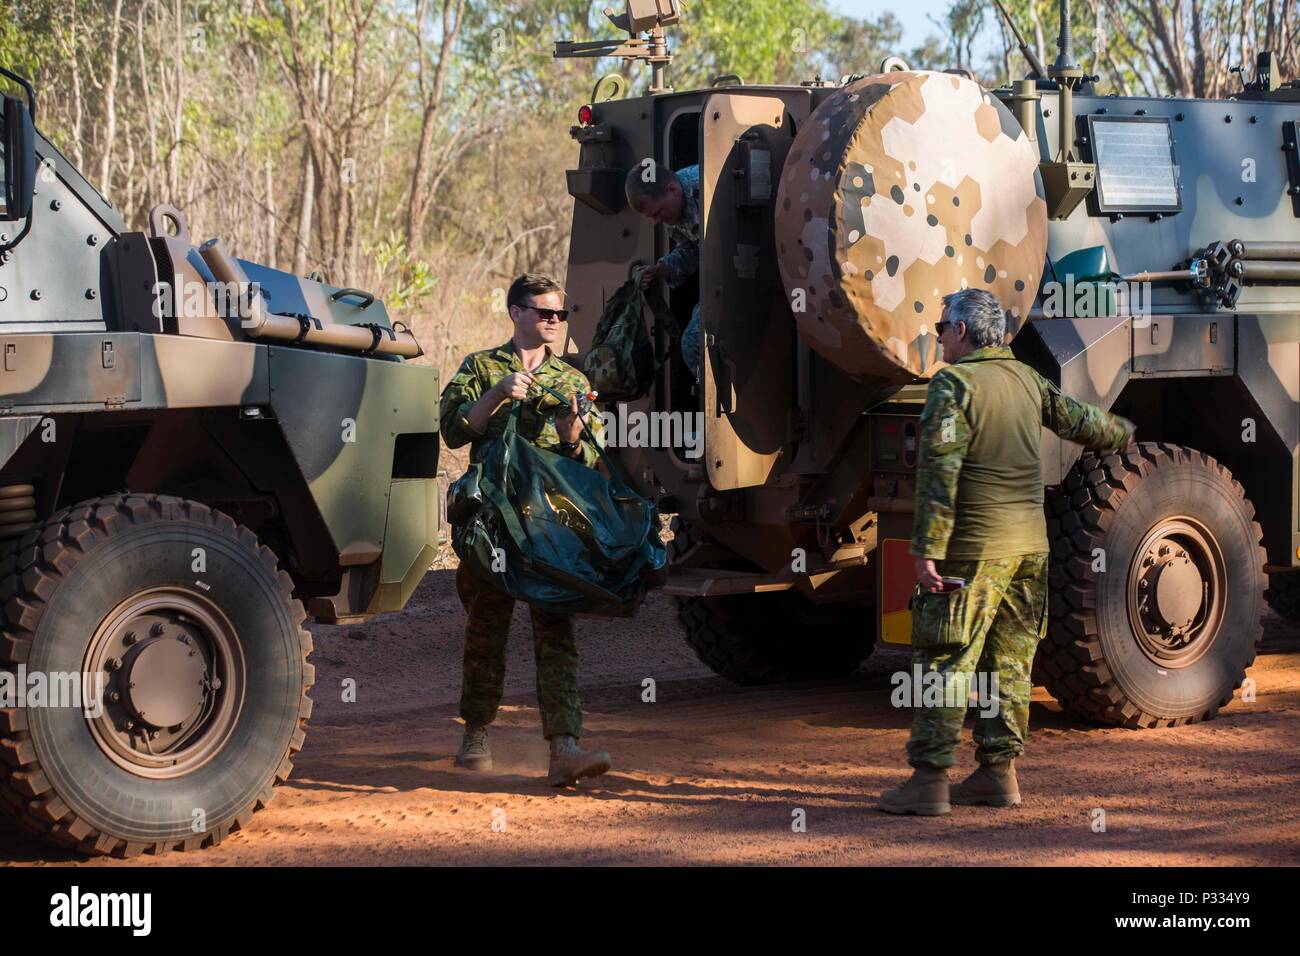 U.S. Marines and soldiers, Australian Army soldiers, and the People’s Liberation Army soldiers arrive to their first location for Exercise Kowari in the Northern Territory, Australia, August 28, 2016. The purpose of Exercise Kowari is to enhance the United States, Australia, and China’s friendship and trust, through trilateral cooperation in the Indo-Asia-Pacific region. (U.S. Marine Corps photo by Lance Cpl. Osvaldo L. Ortega III/Released) Stock Photo